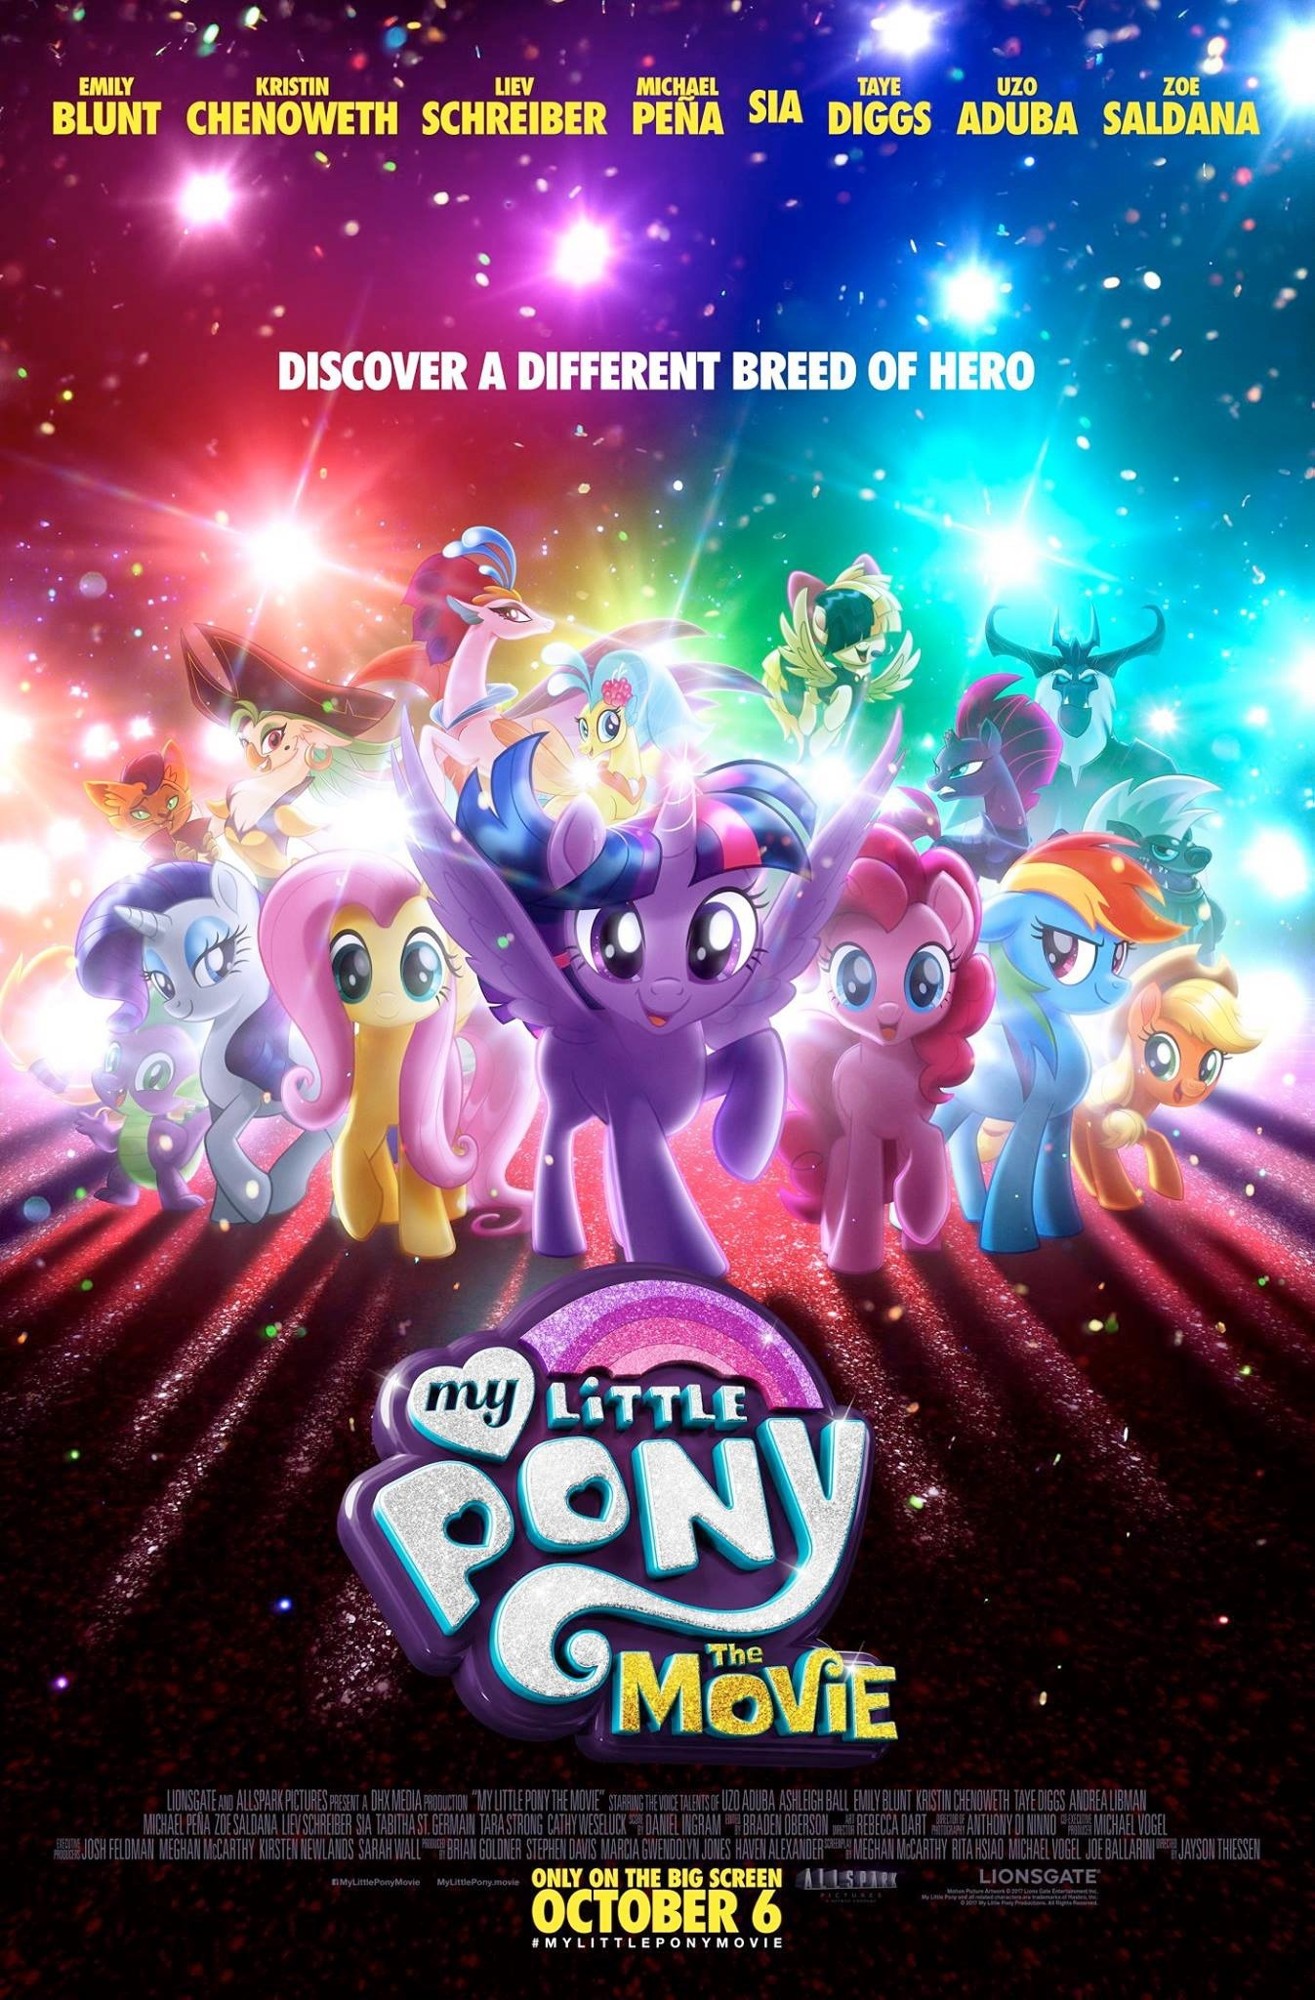 my little pony movie free full download no sign up